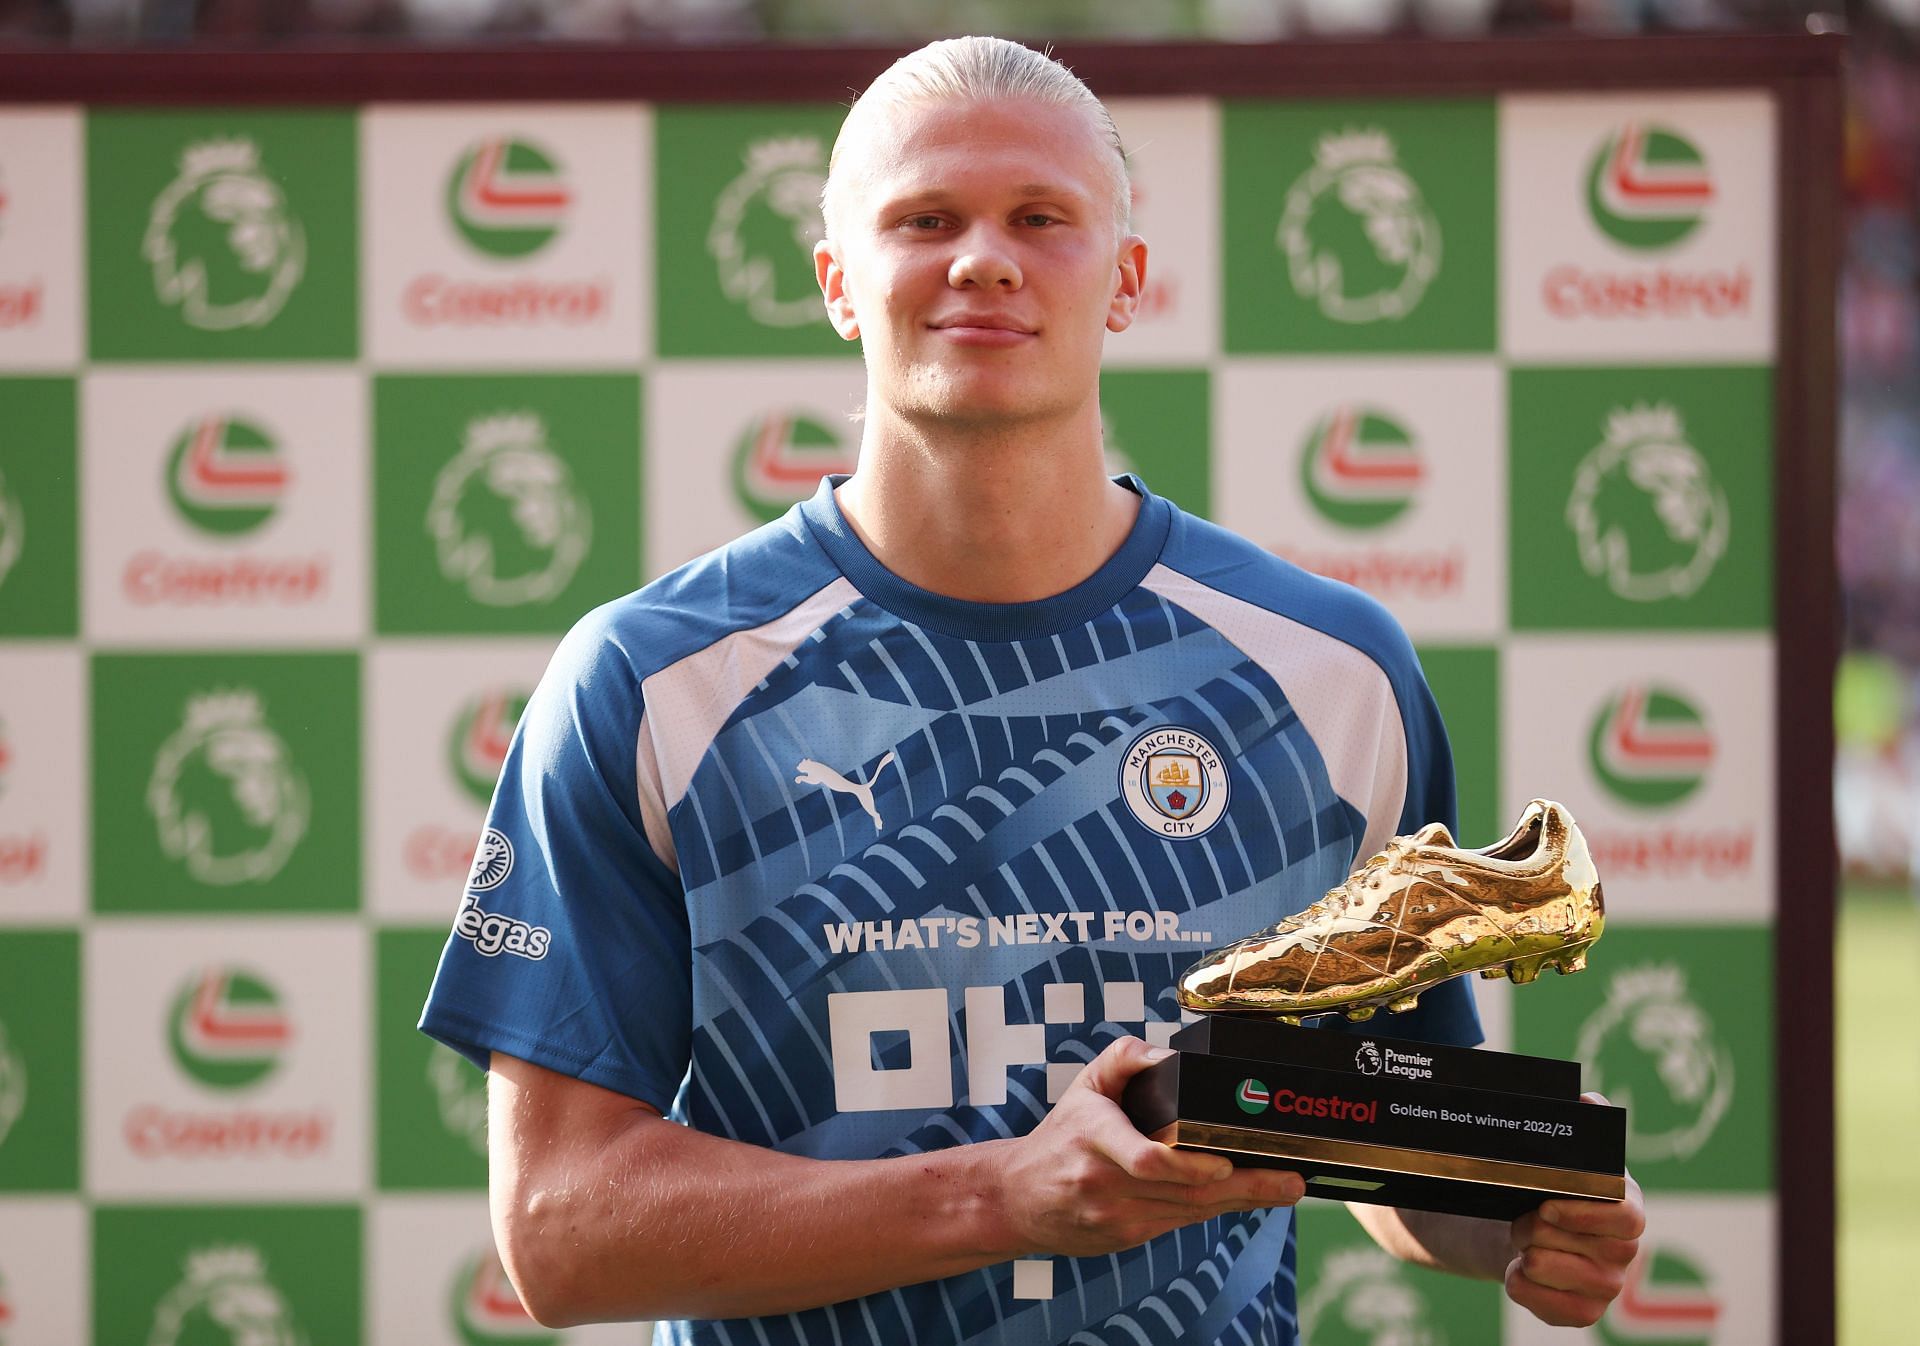 The Norweigan won the Golden Boot in style last season.